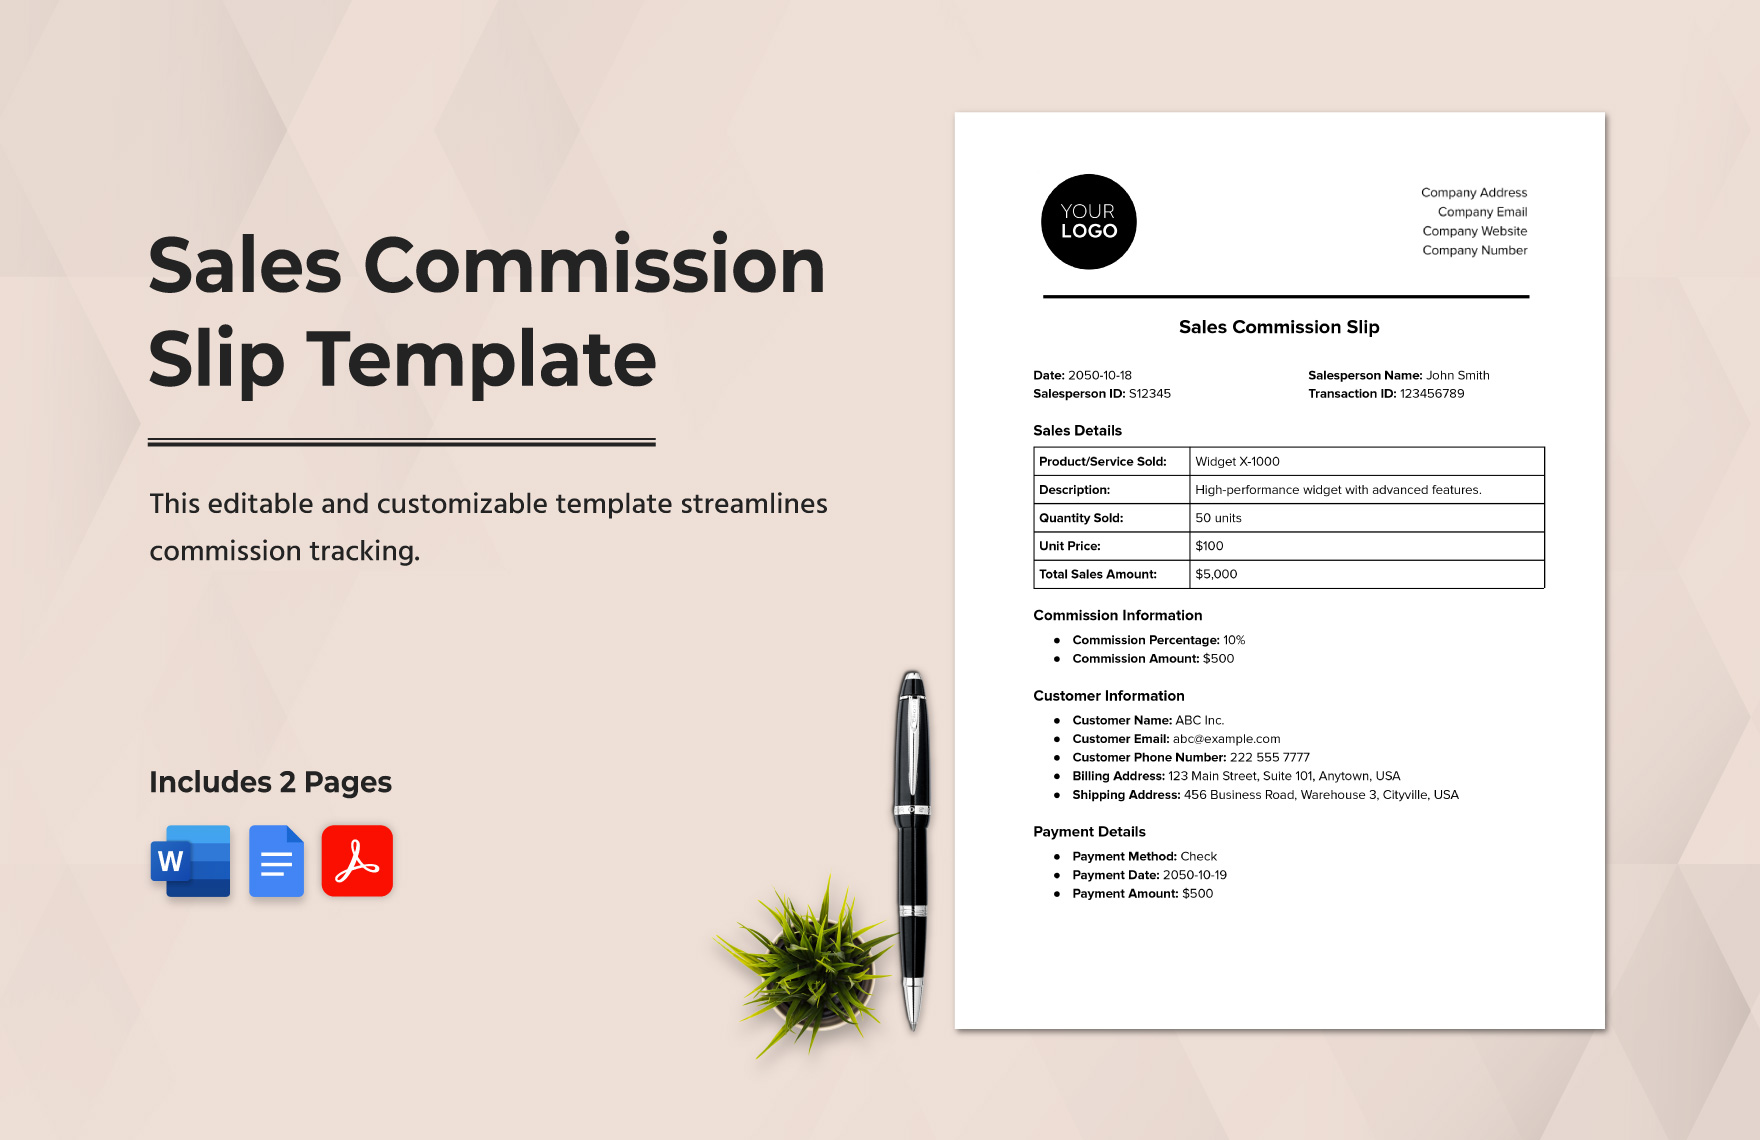 Sales Commission Slip Template in Word, Google Docs, PDF